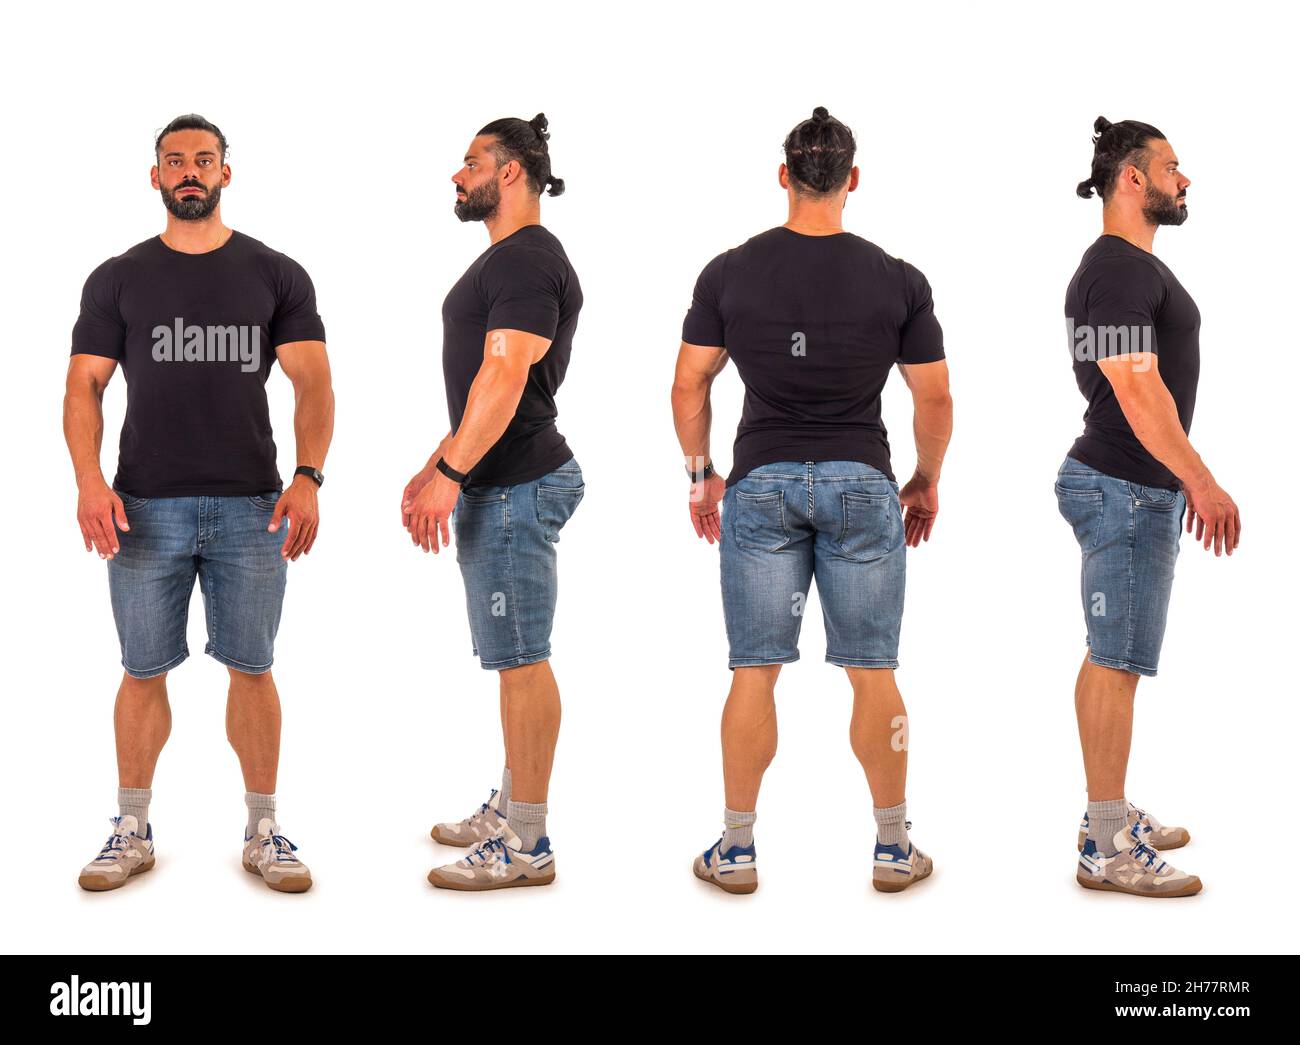 Four views of bodybuilder: back, front, sides Stock Photo